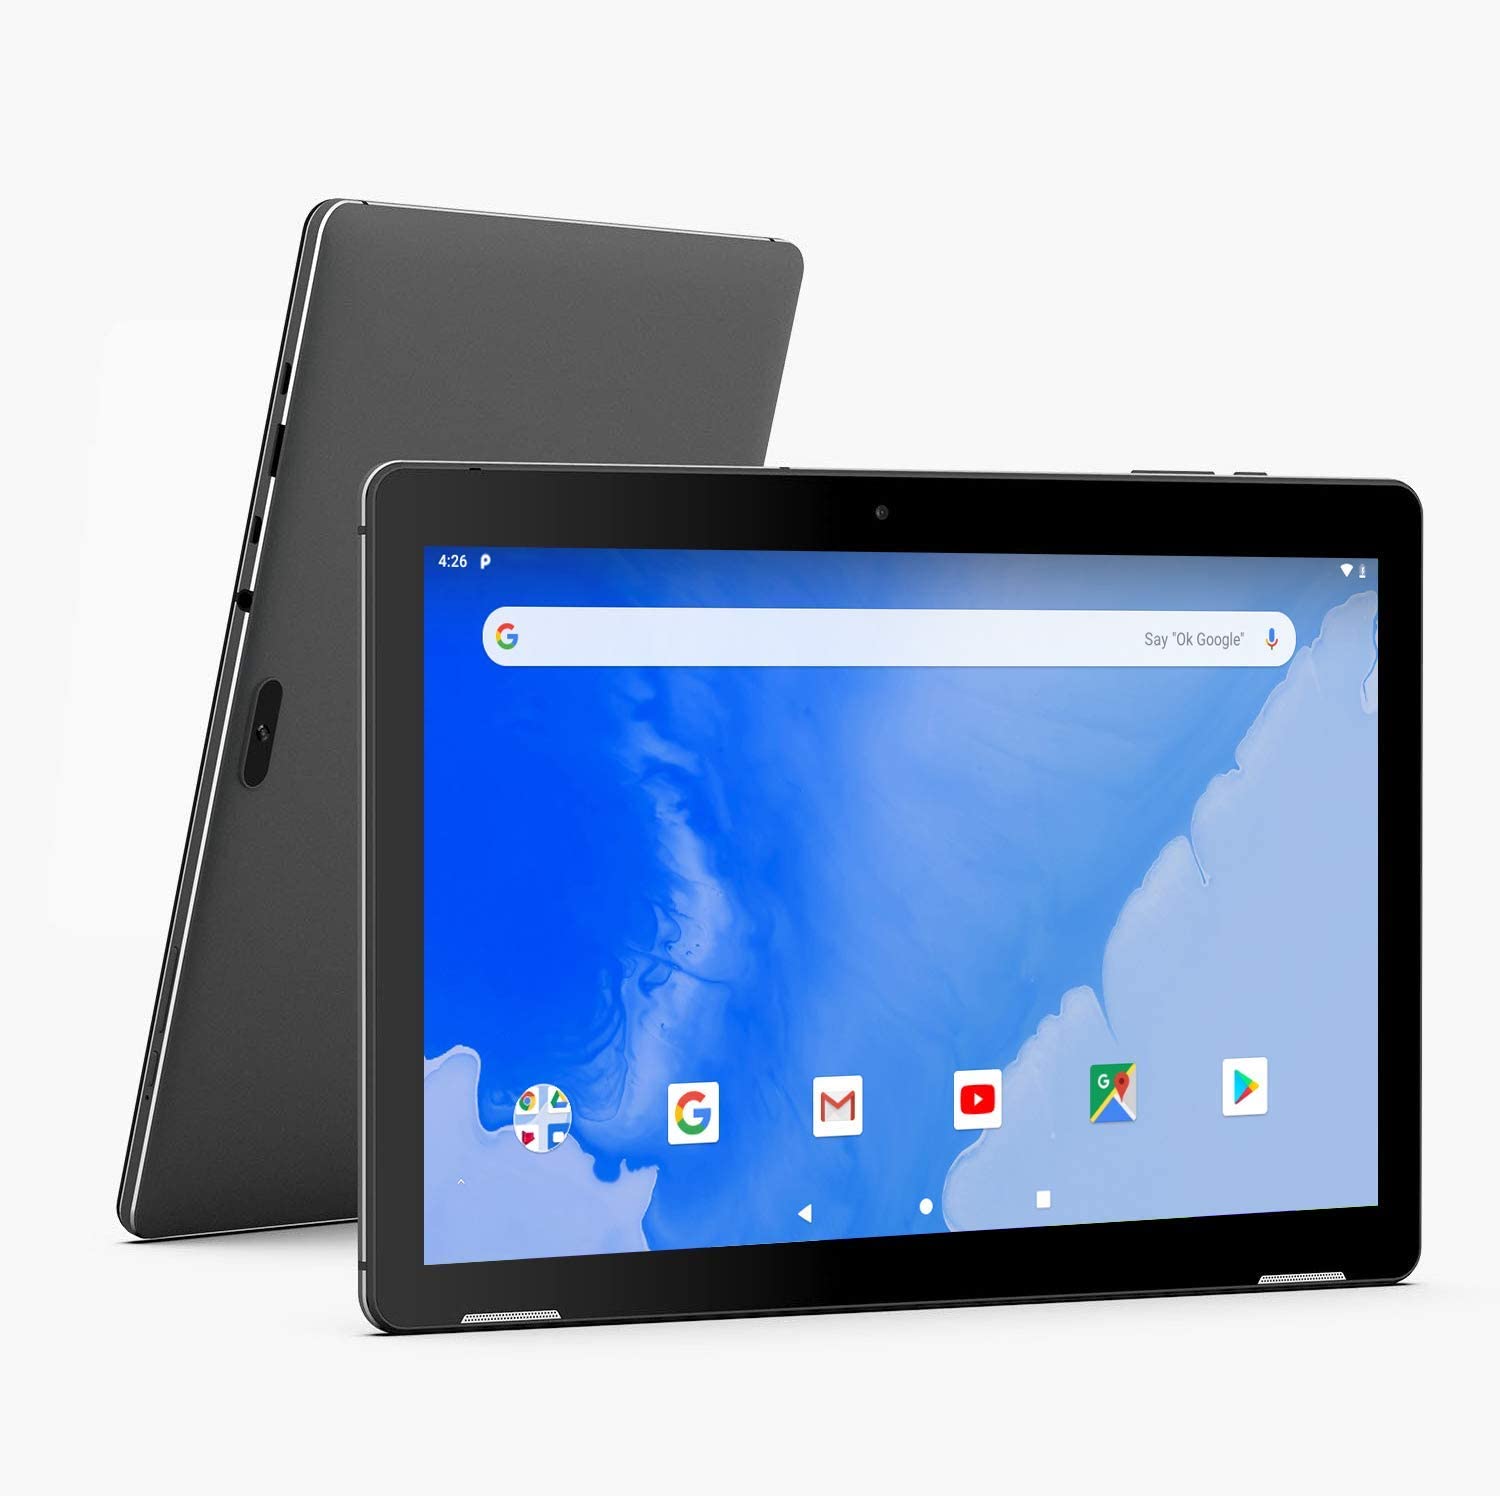 Android Tablet 10 Inch WiFi PC Tablets - Winnovo T10 MT8163 3GB RAM 32GB ROM HD IPS 1280x800 2.0MP+5.0MP Camera Gyroscope Accelerometer Bluetooth HDMI GPS FM Android 9.0 Pie (Black)